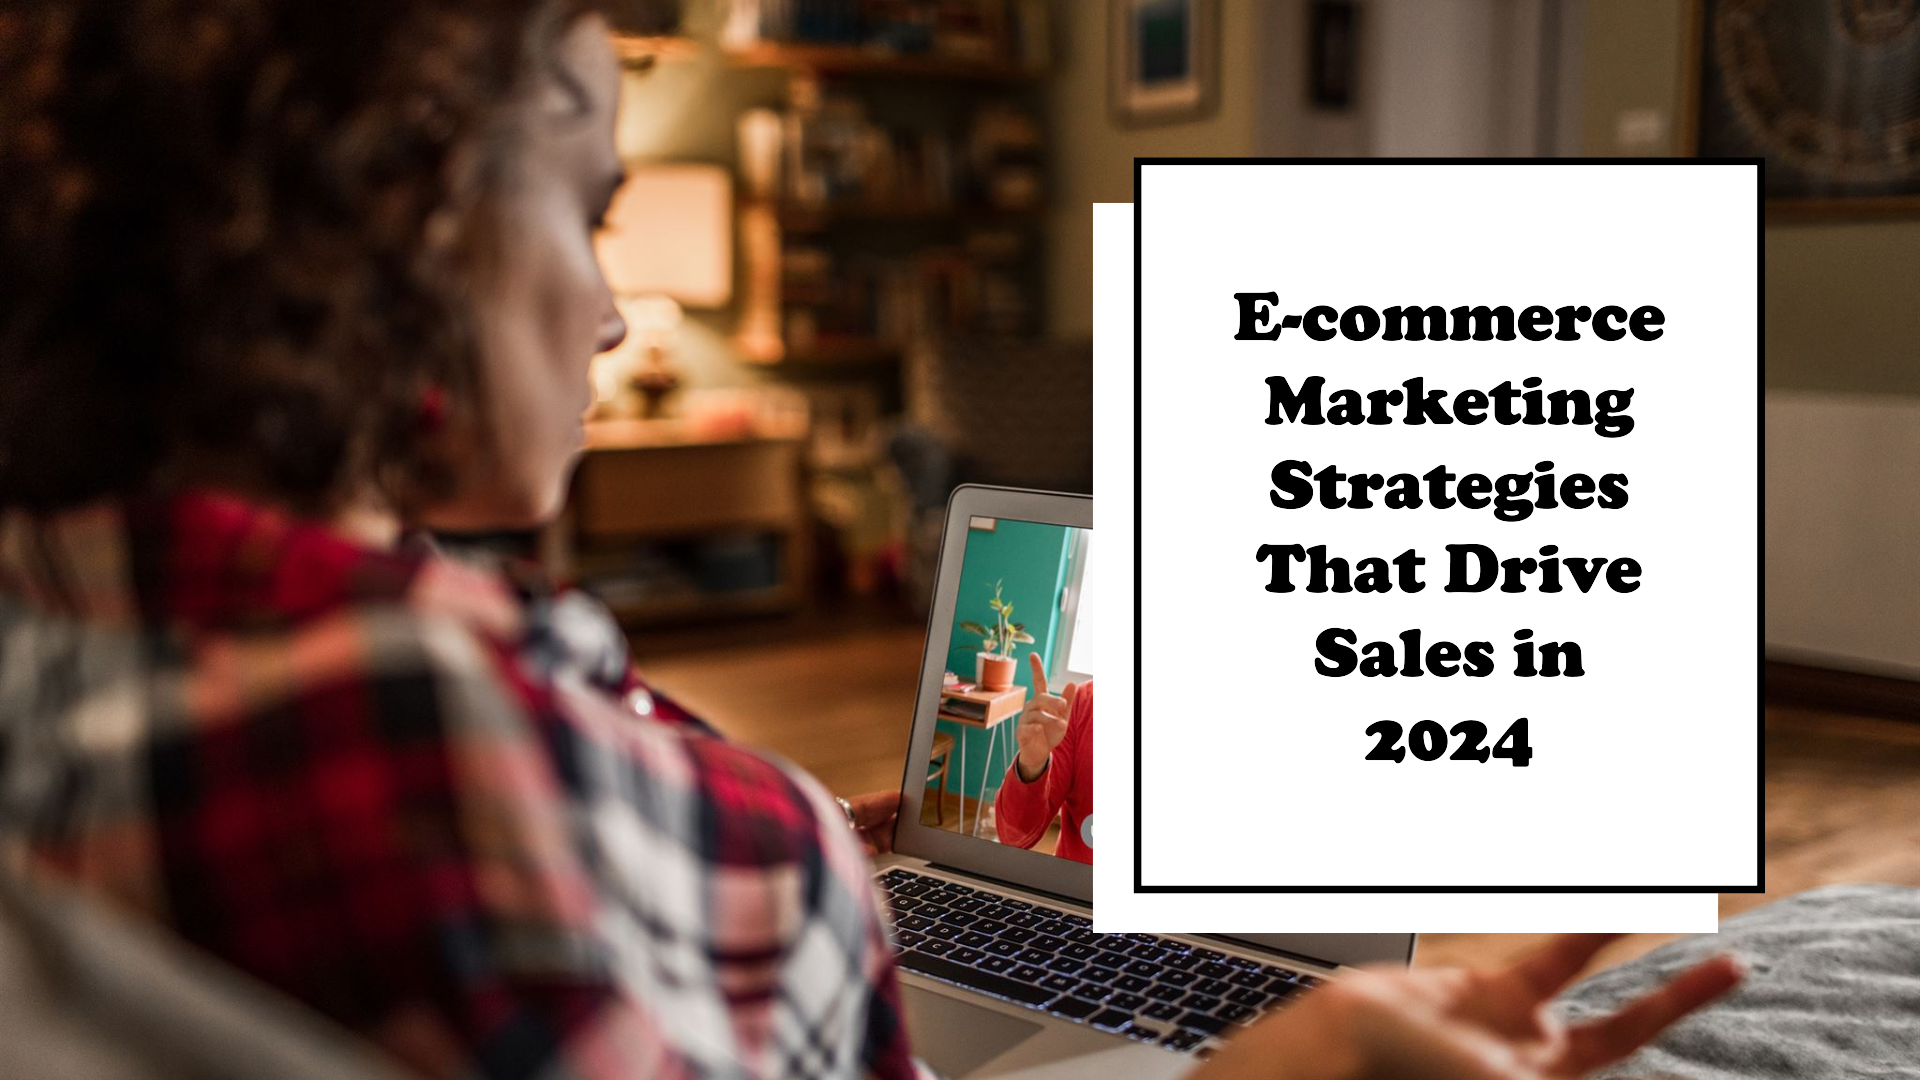 E-commerce Marketing Strategies That Drive Sales in 2024